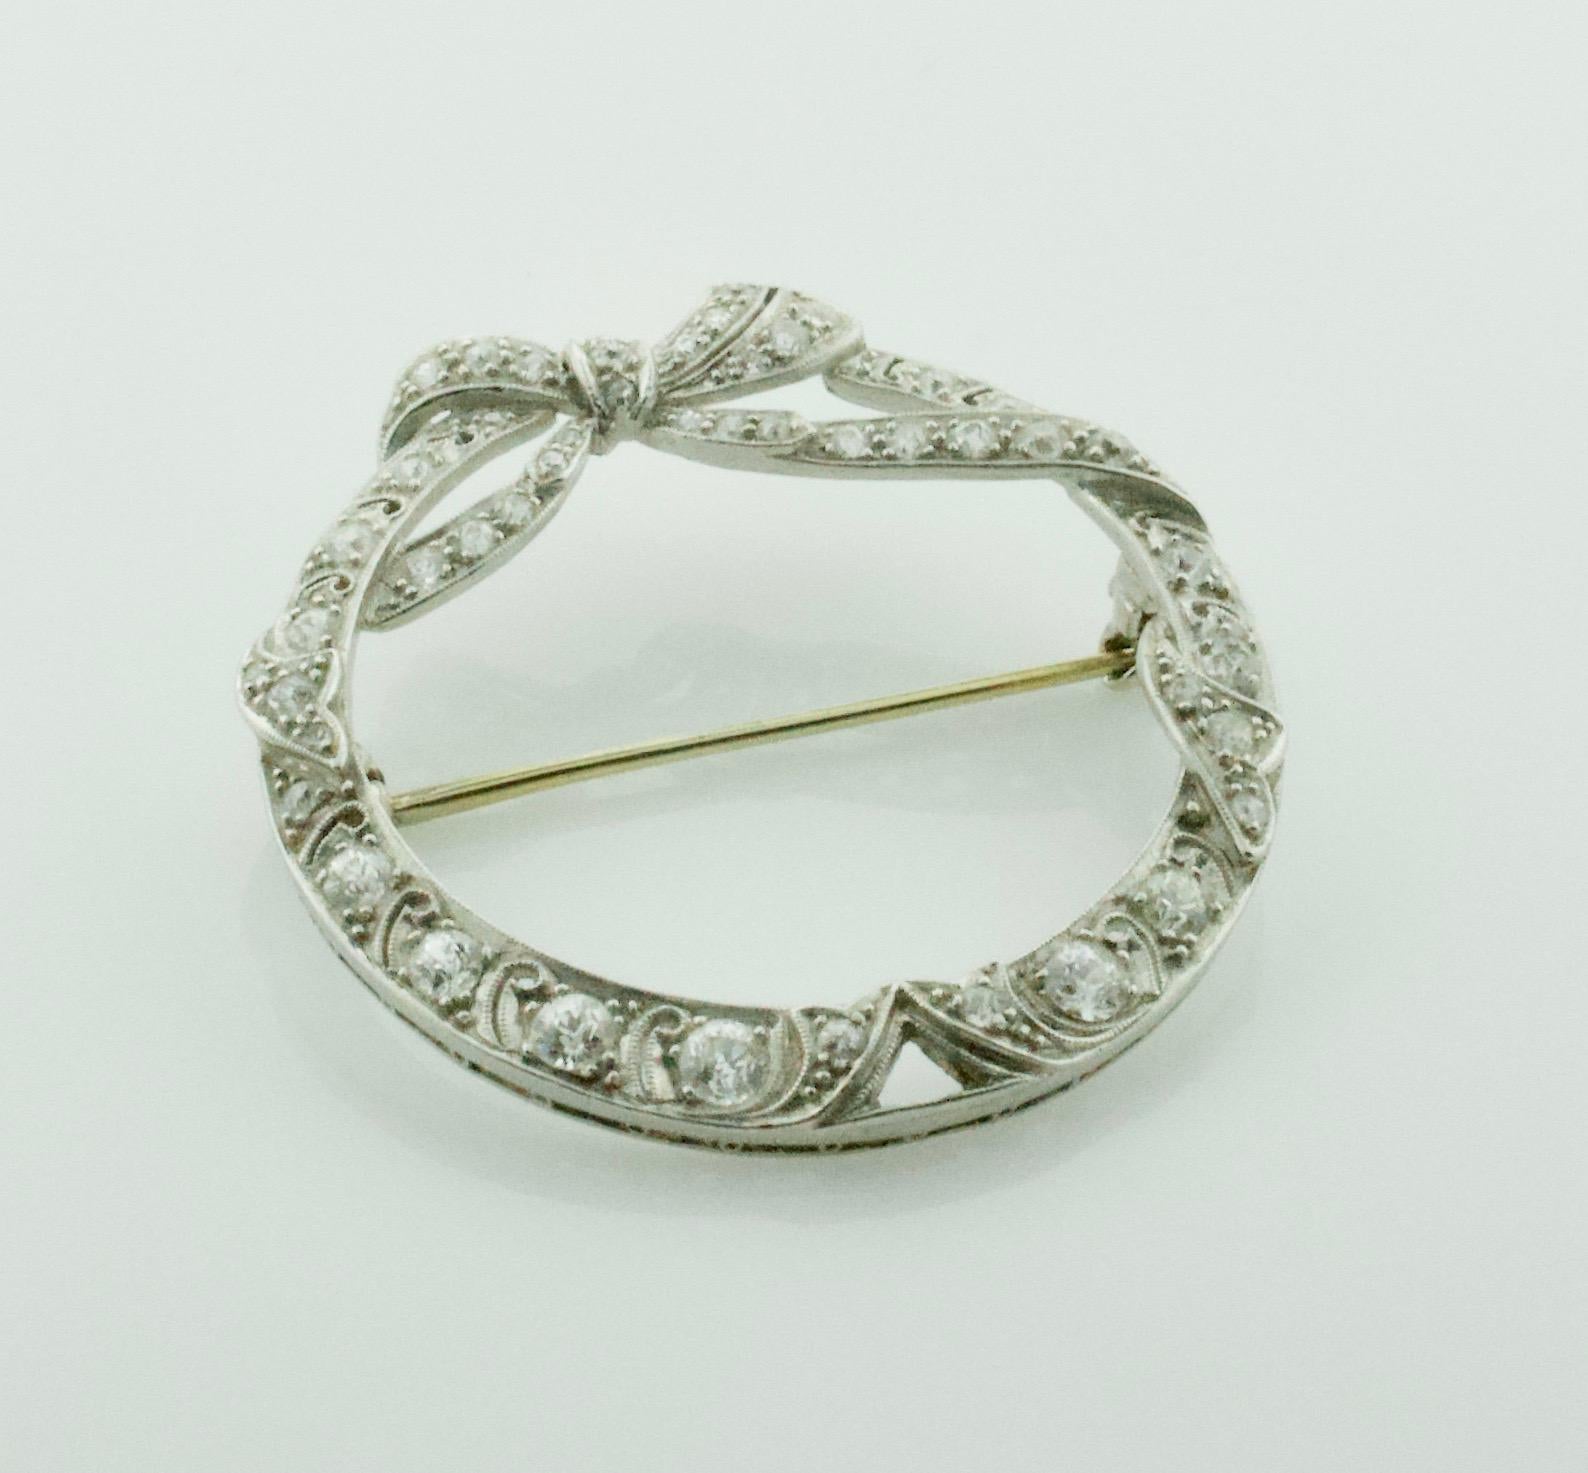 Circa 1920's Handmade Platinum Diamond Circle Brooch
Forty Old European and Single Cut Diamonds weighing 2.00 carats approximately [GH VVS-SI]
Beautifully Constructed  
